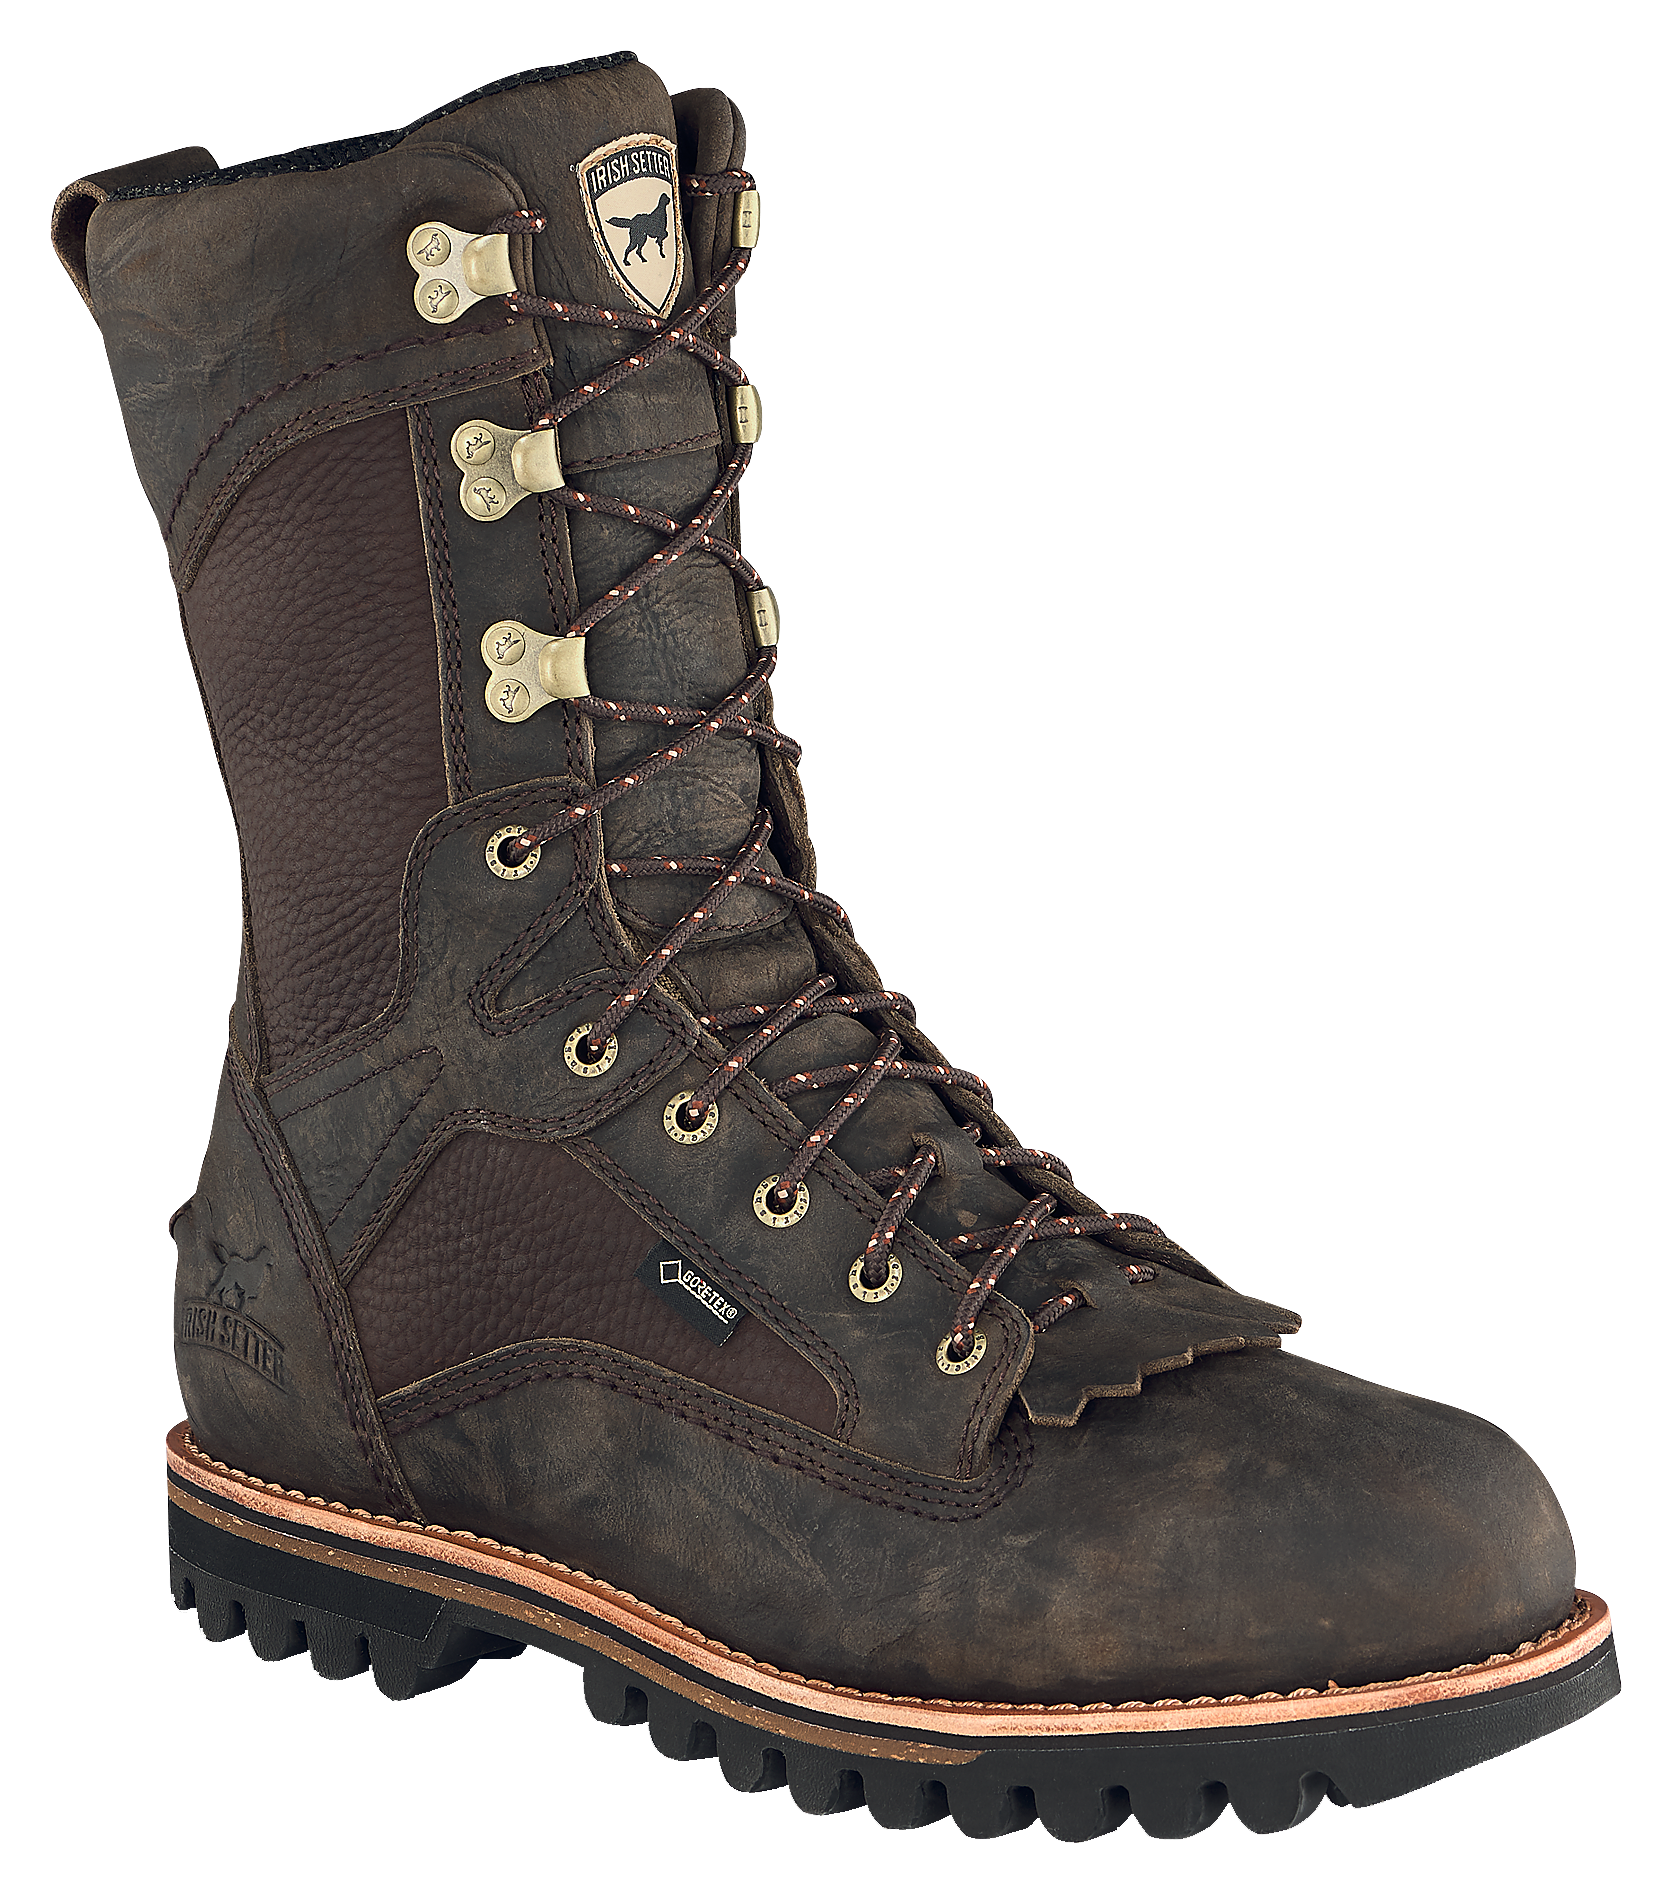 Irish Setter Elk Tracker GORE-TEX Insulated Hunting Boots for Men - Brown - 9M